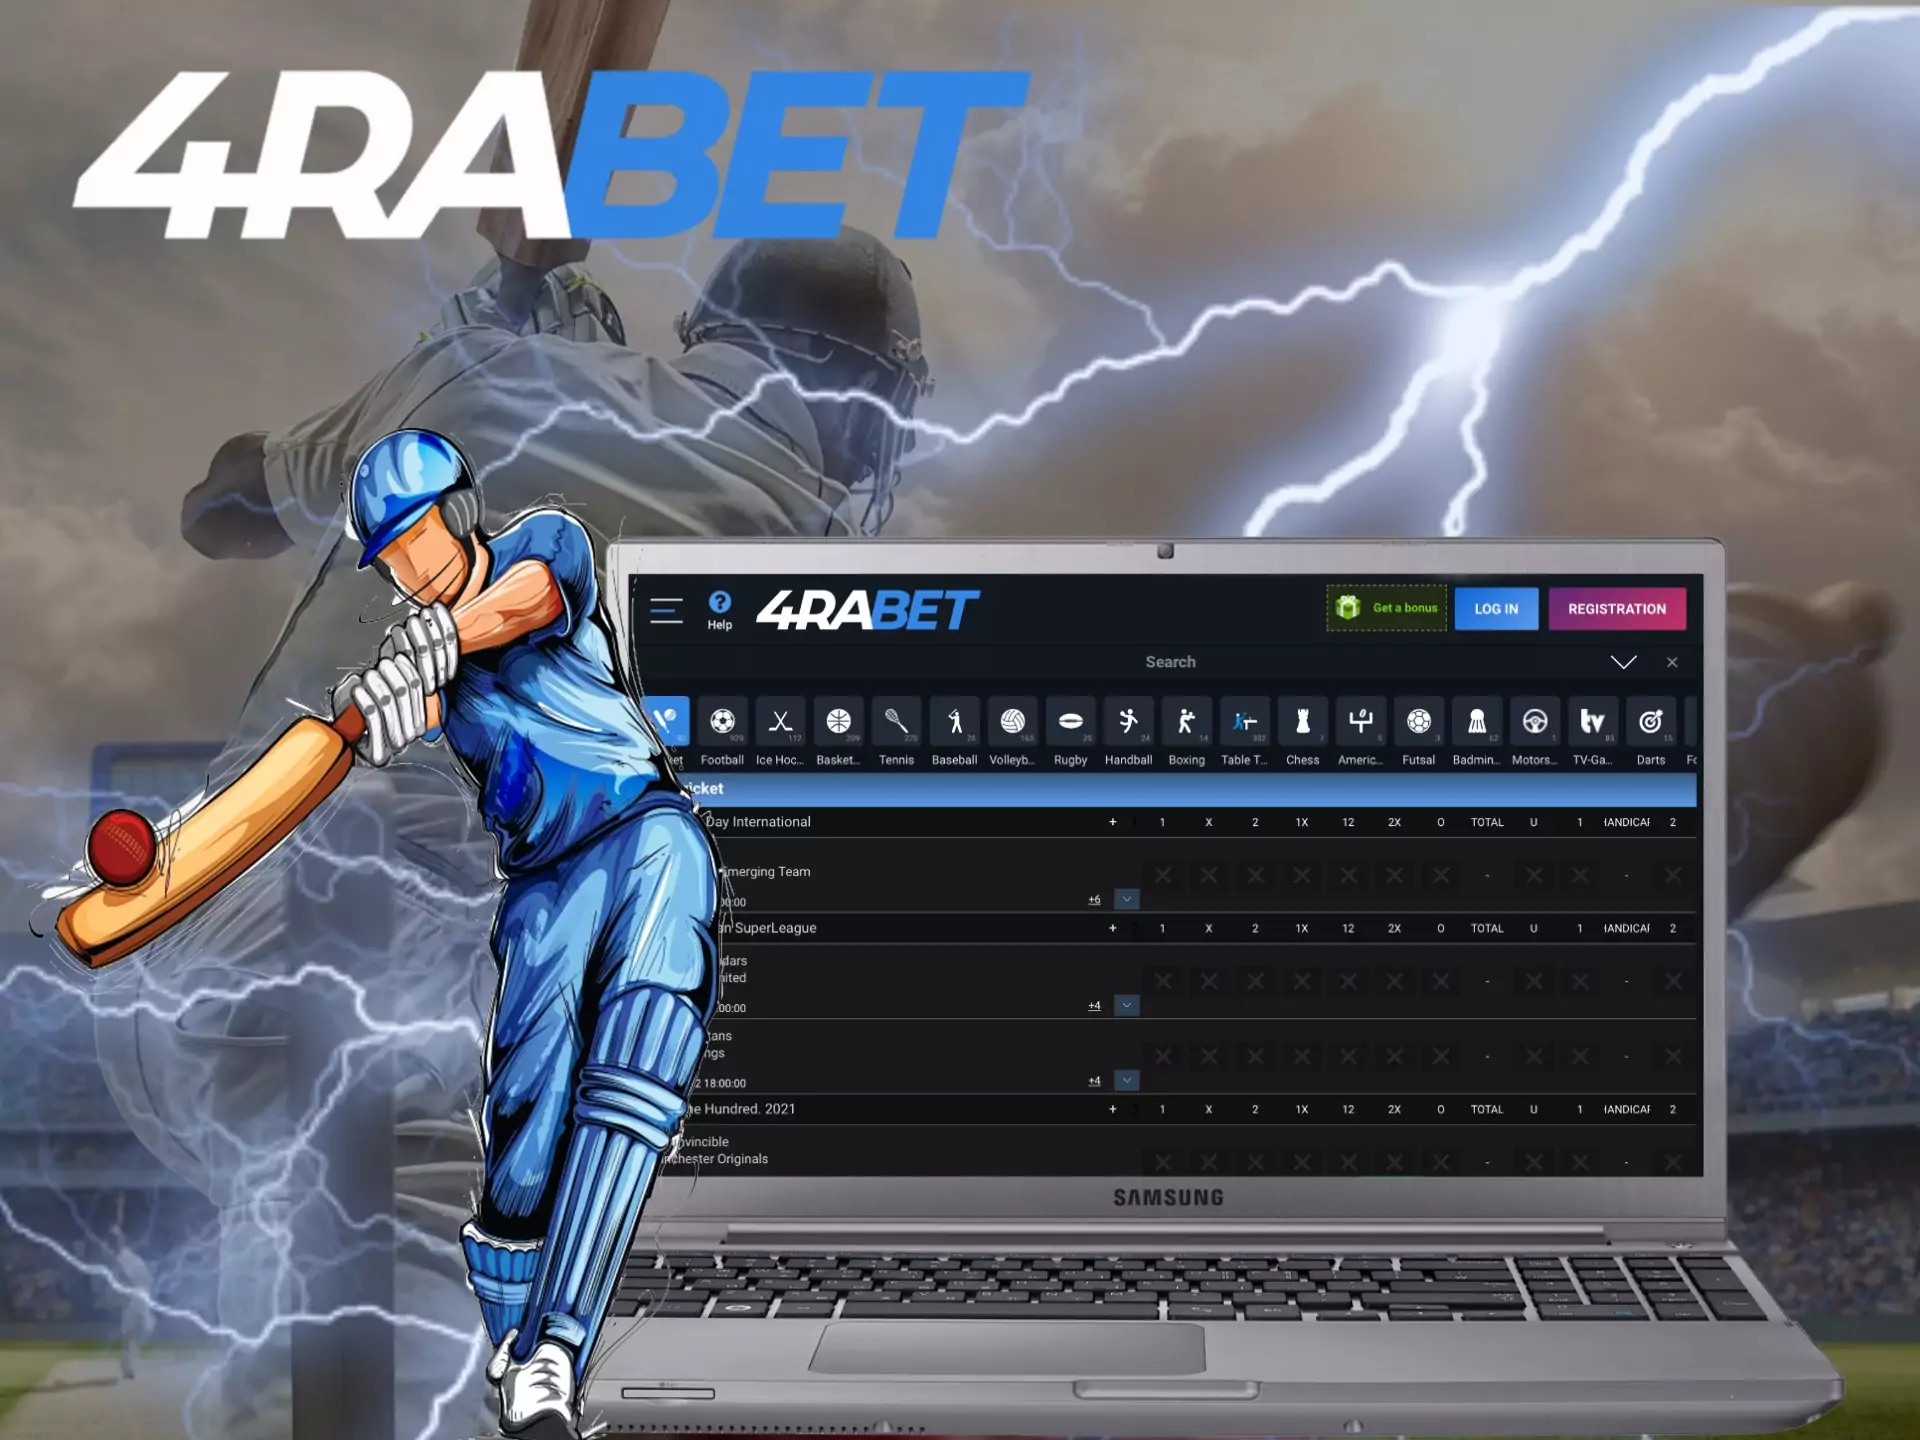 You can bet on a lot of cricket events and markets at 4rabet.